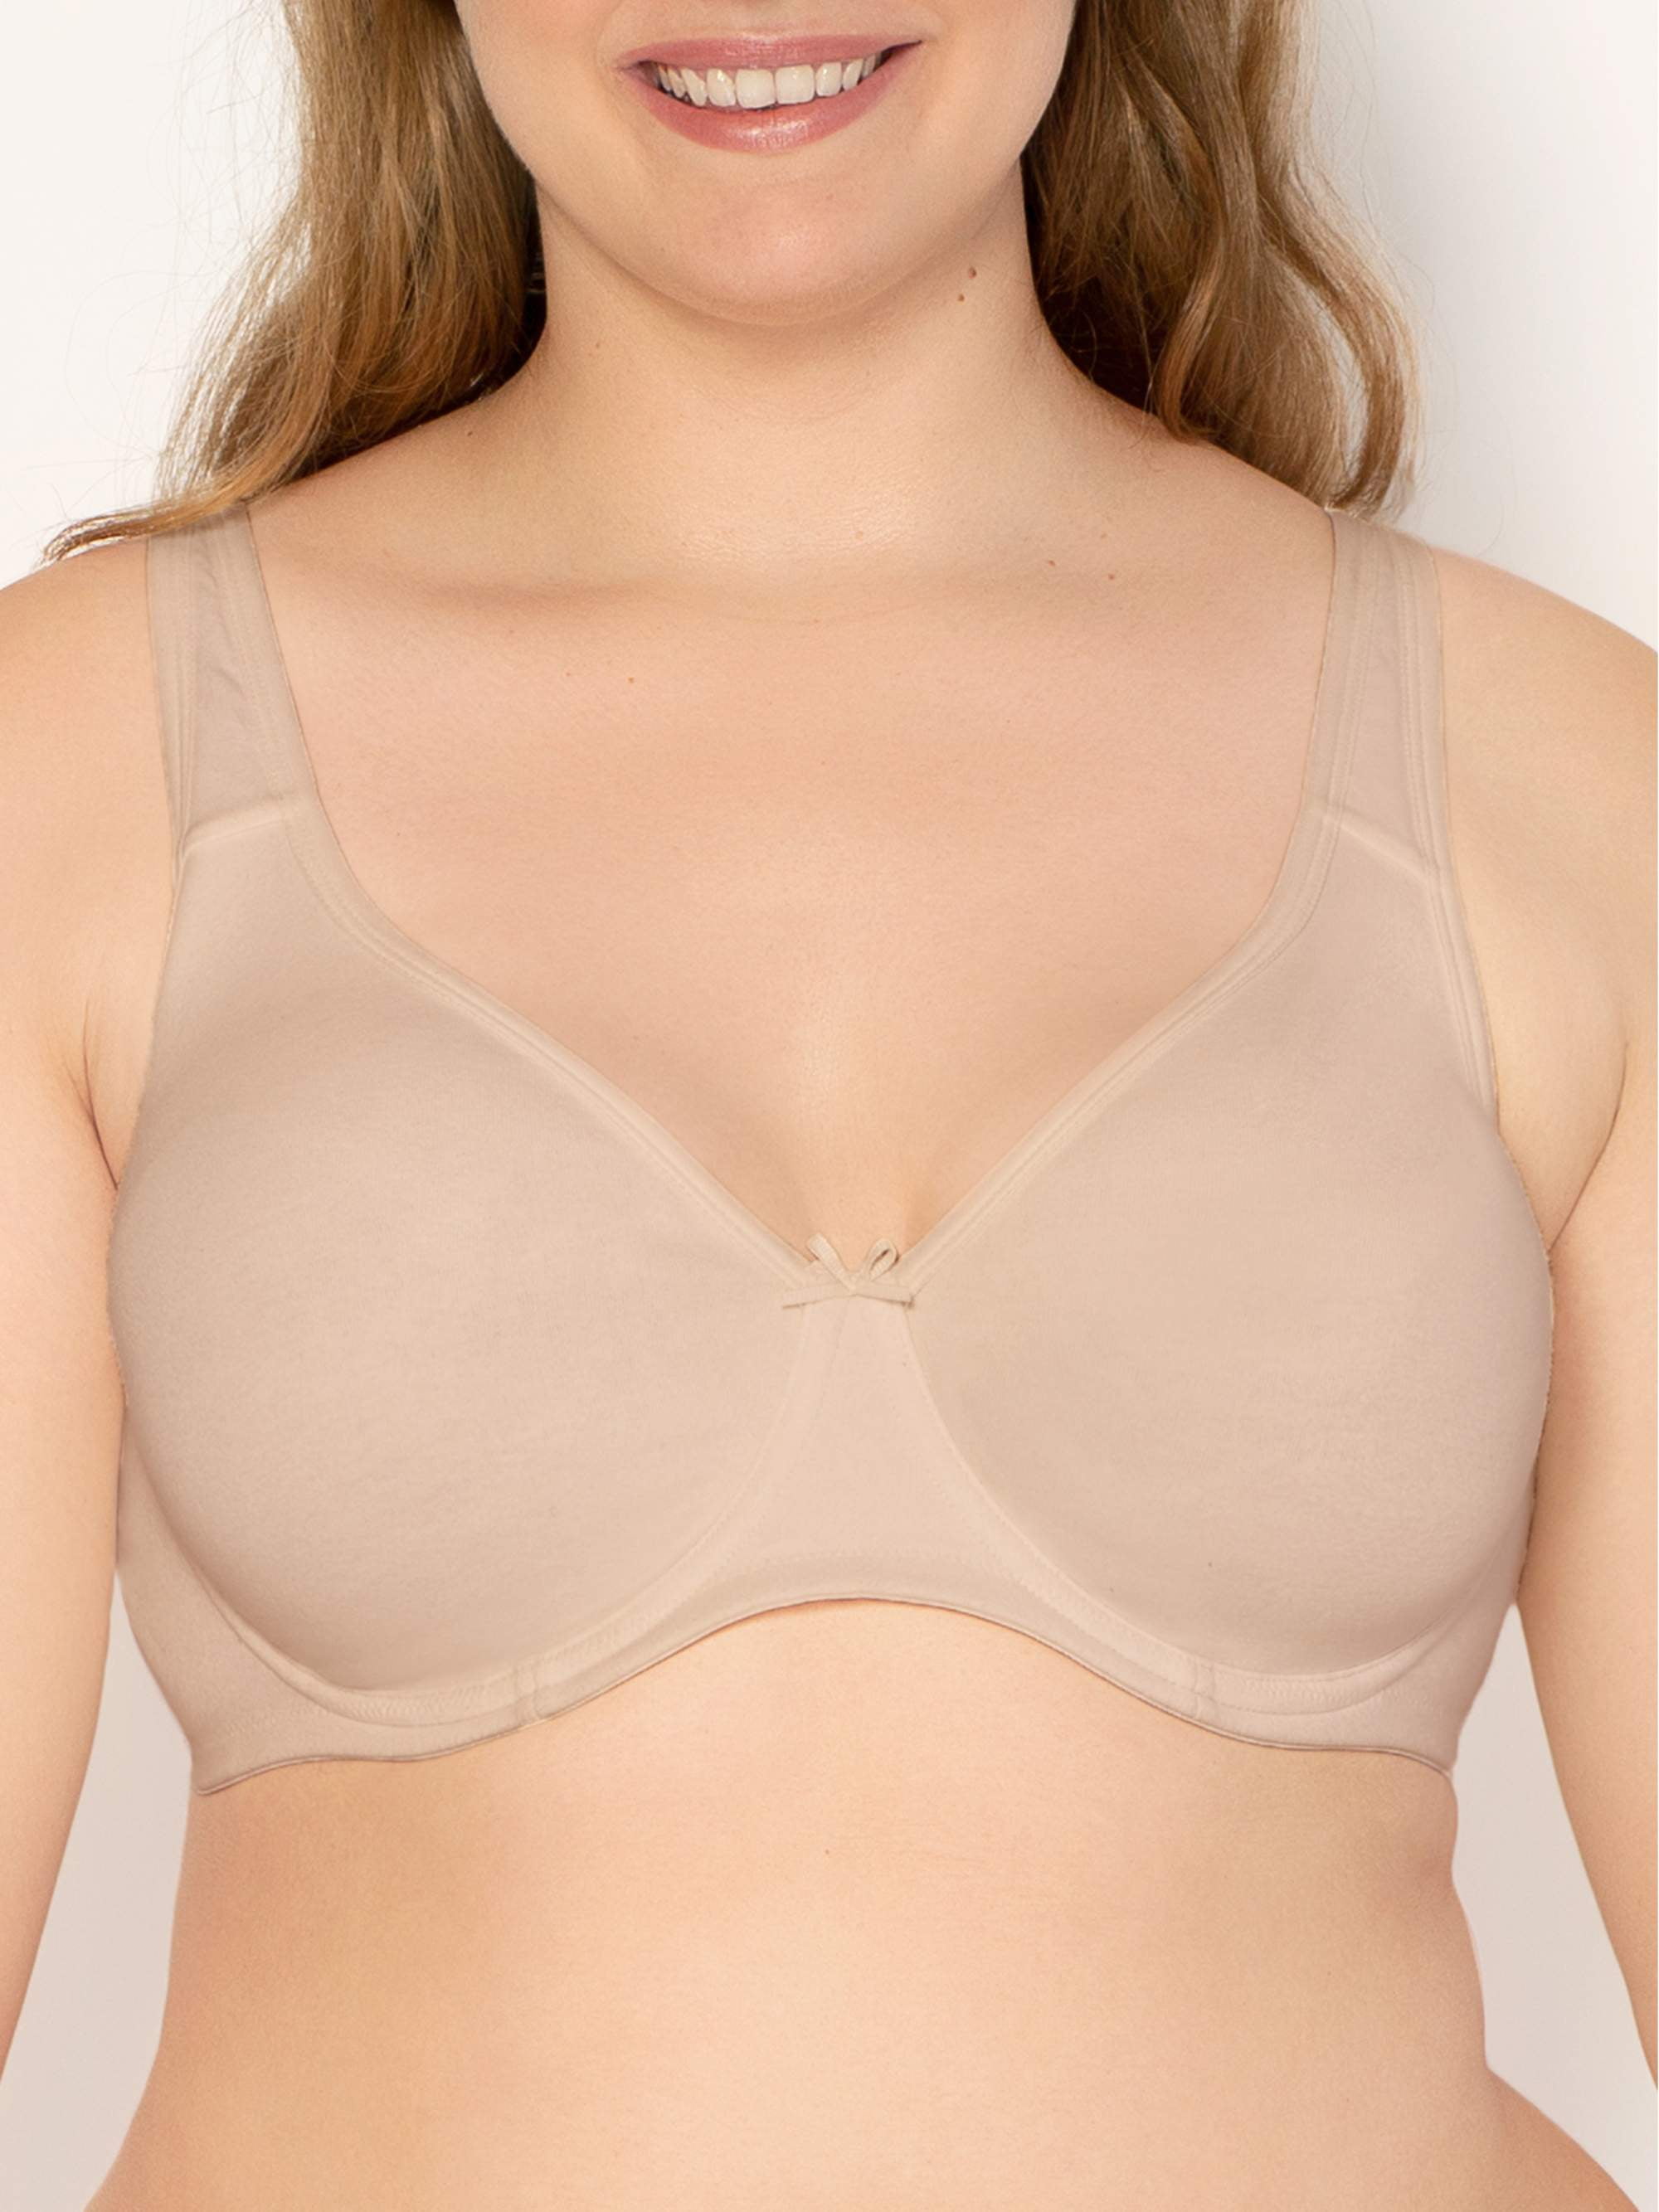 Fruit of the Loom Womens Unlined Underwire Bra Pack of 2